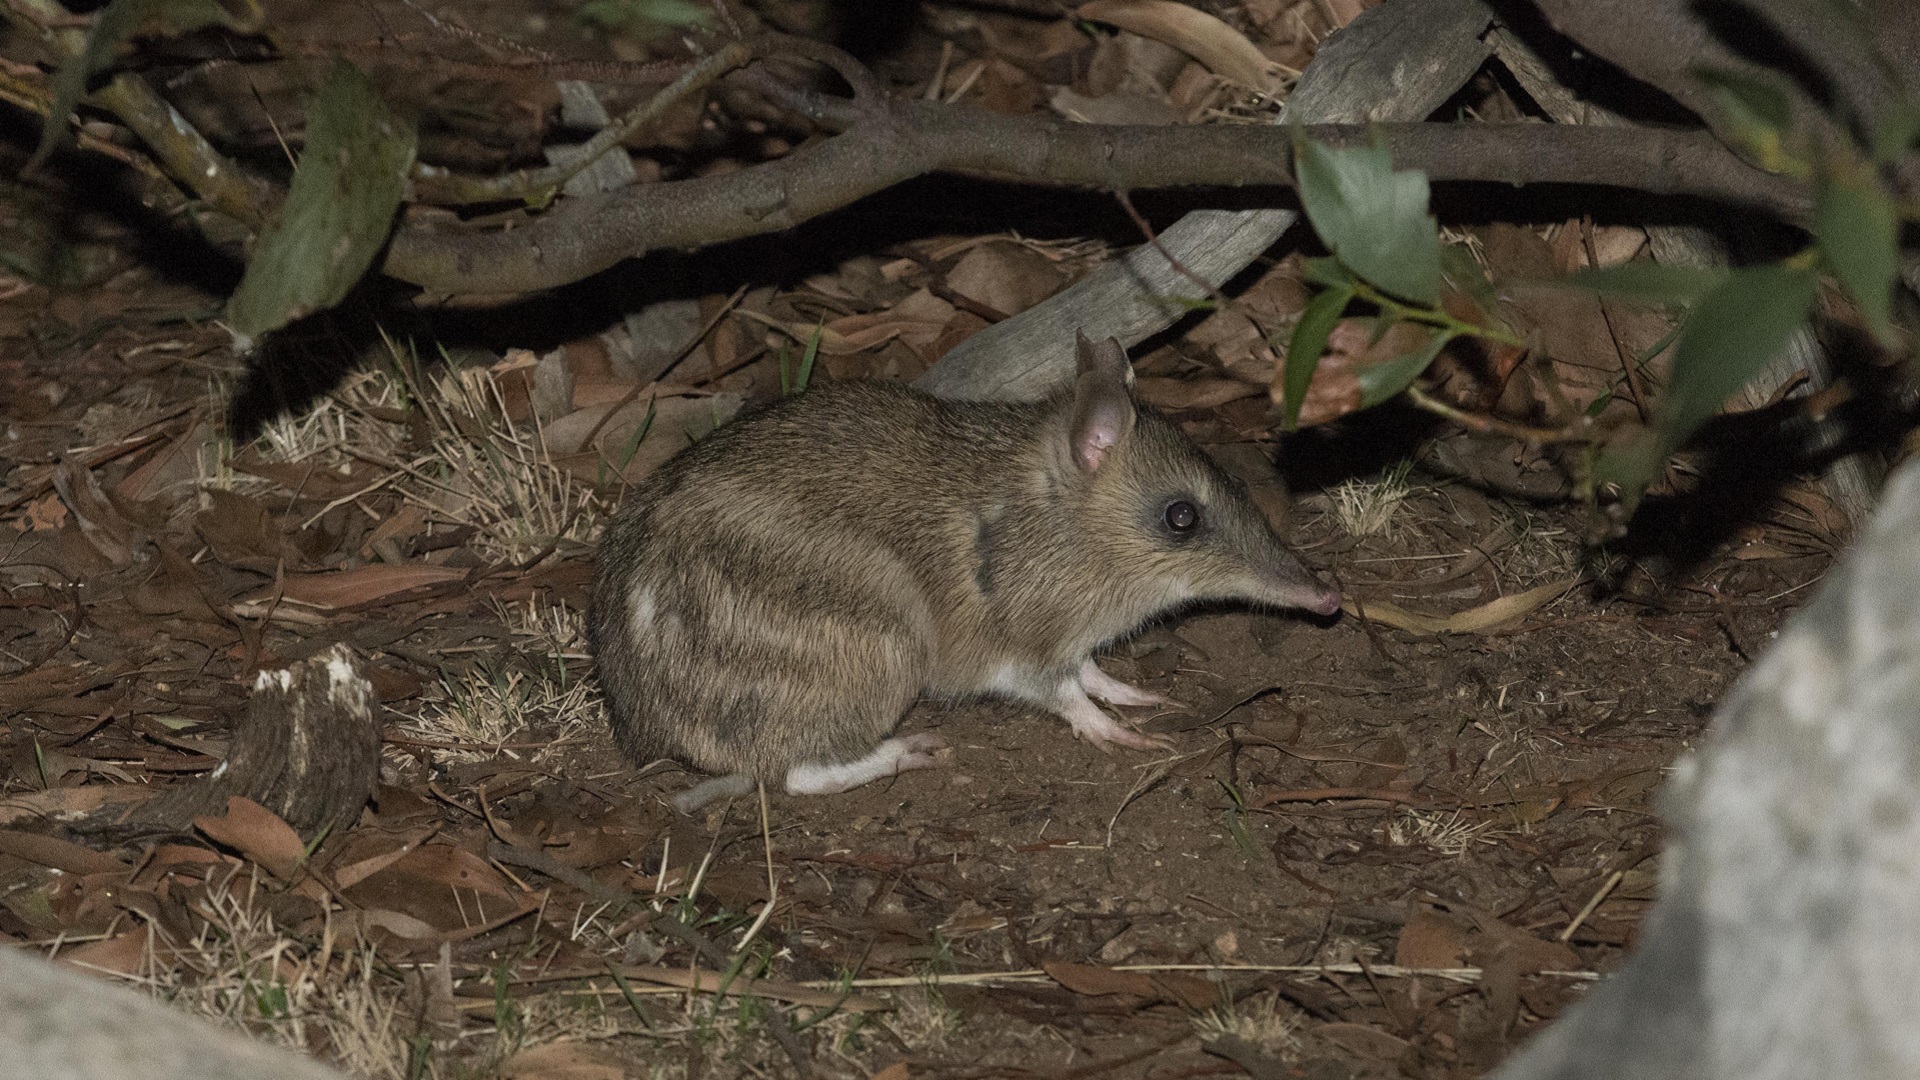 One little bandicoot can dig up an elephant’s worth of soil a year – and our ecosystem loves it